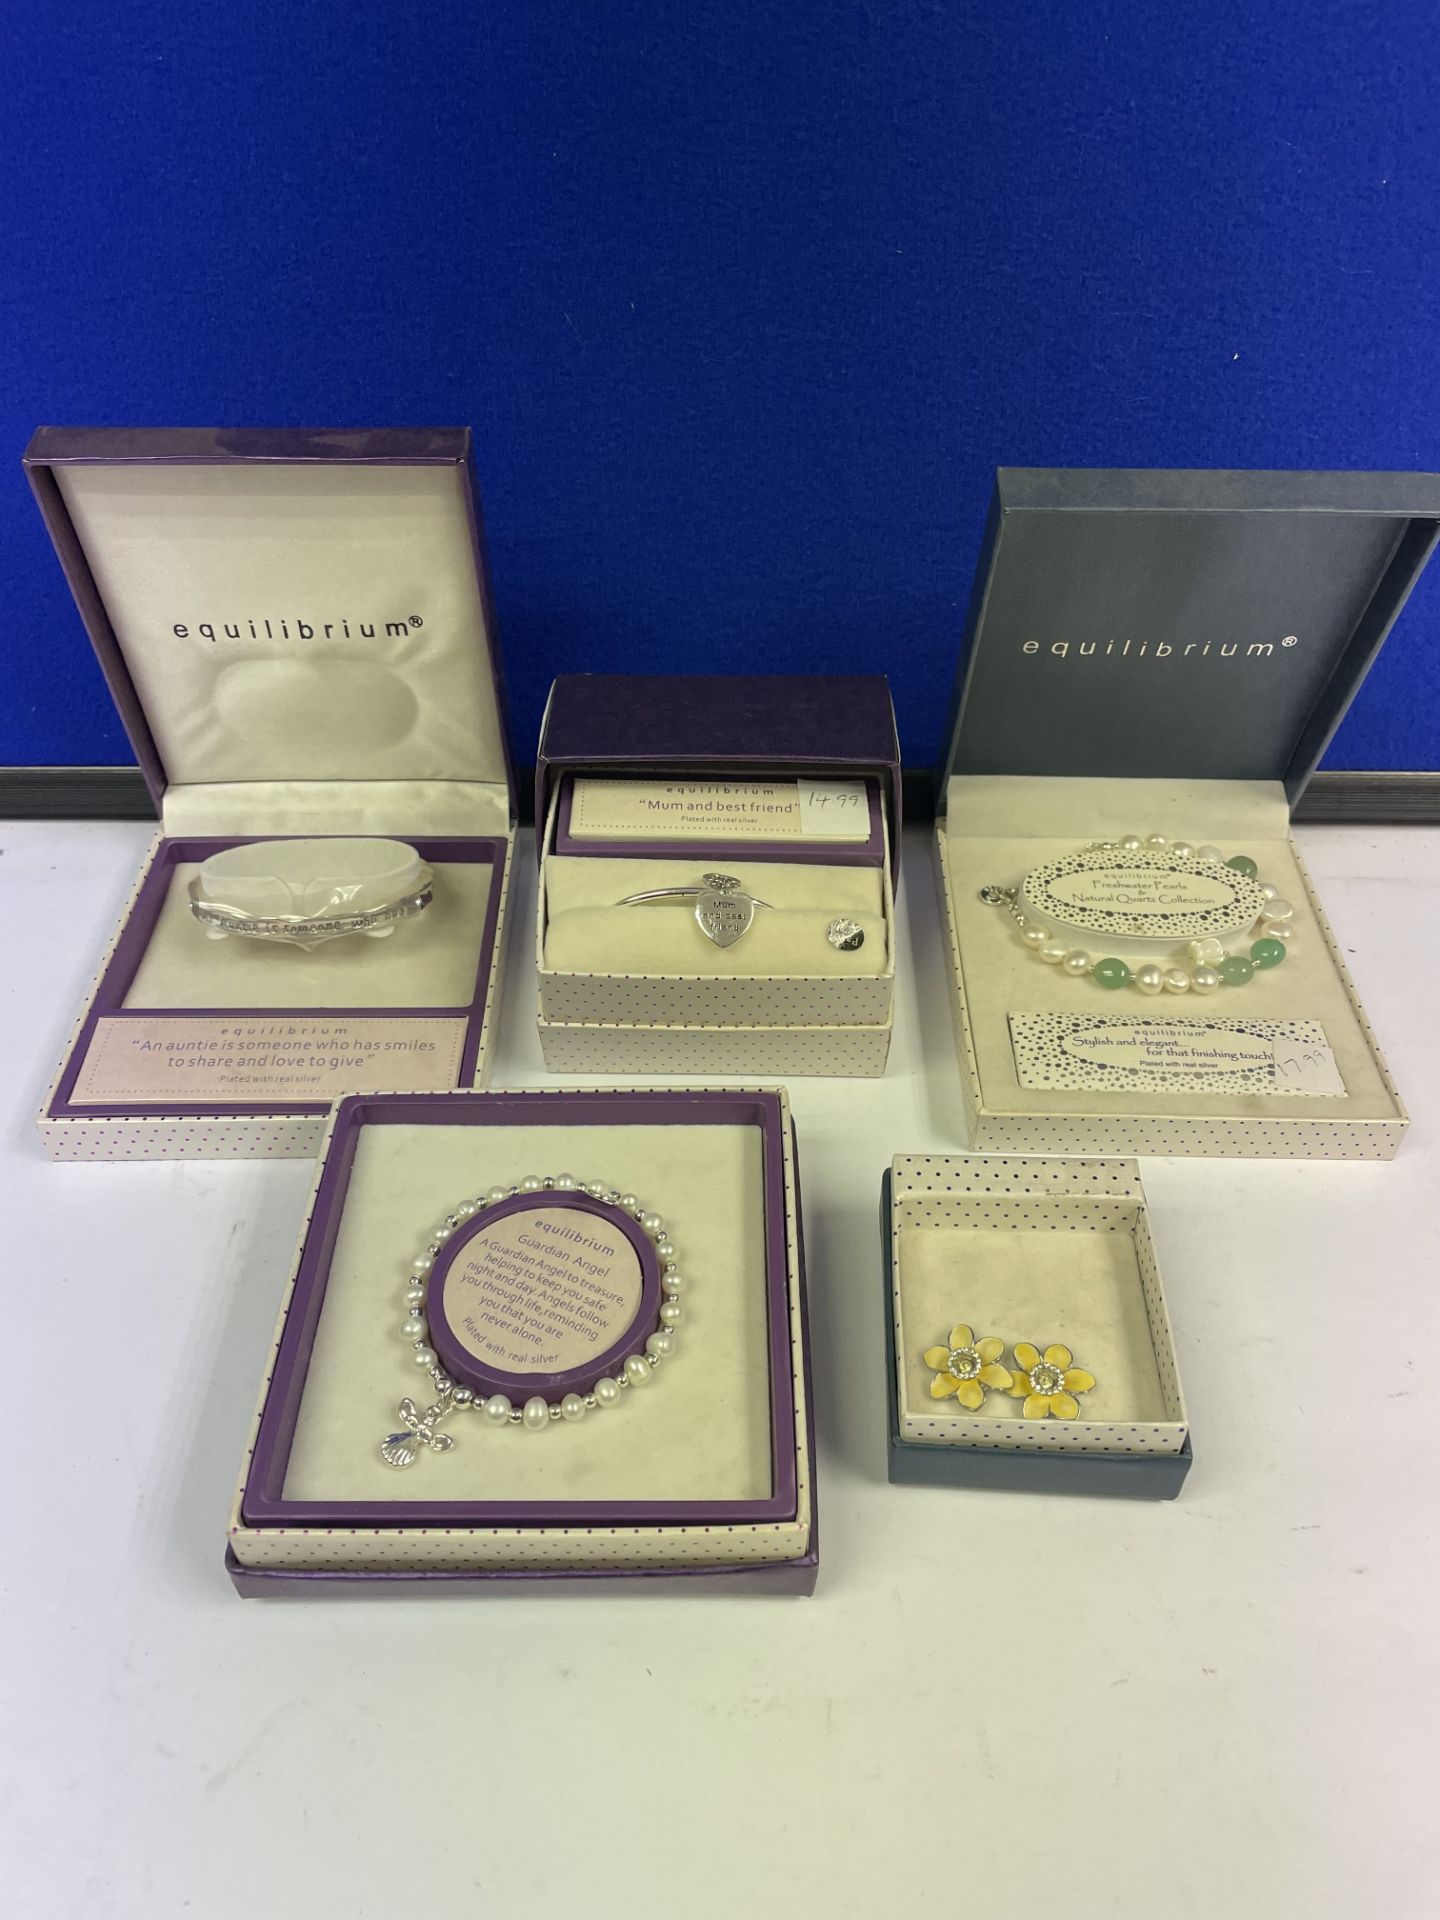 Approx. 60 Pieces of Equilibrium Fashion Jewellery and 160 Sample Yodeyma Fragrances | See descripti - Image 3 of 9